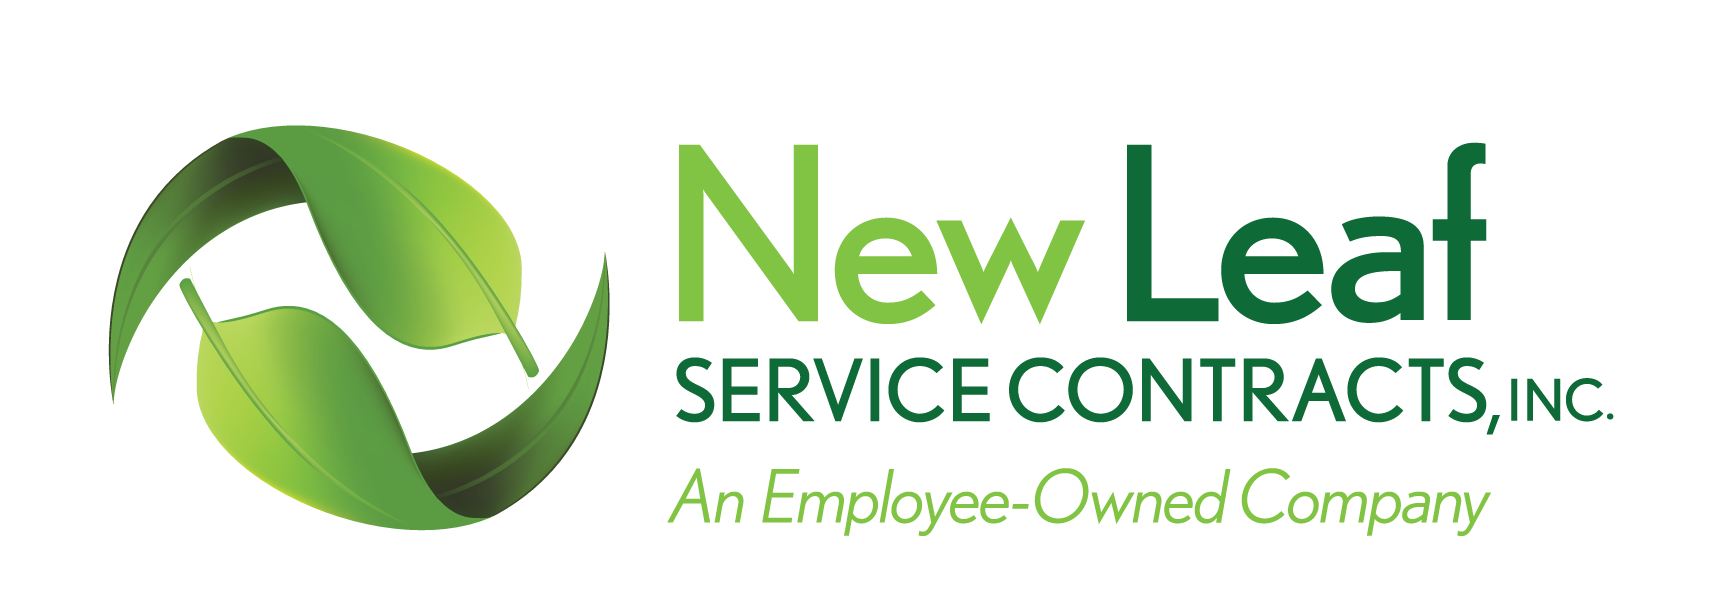 New Leaf Service Contracts LLC